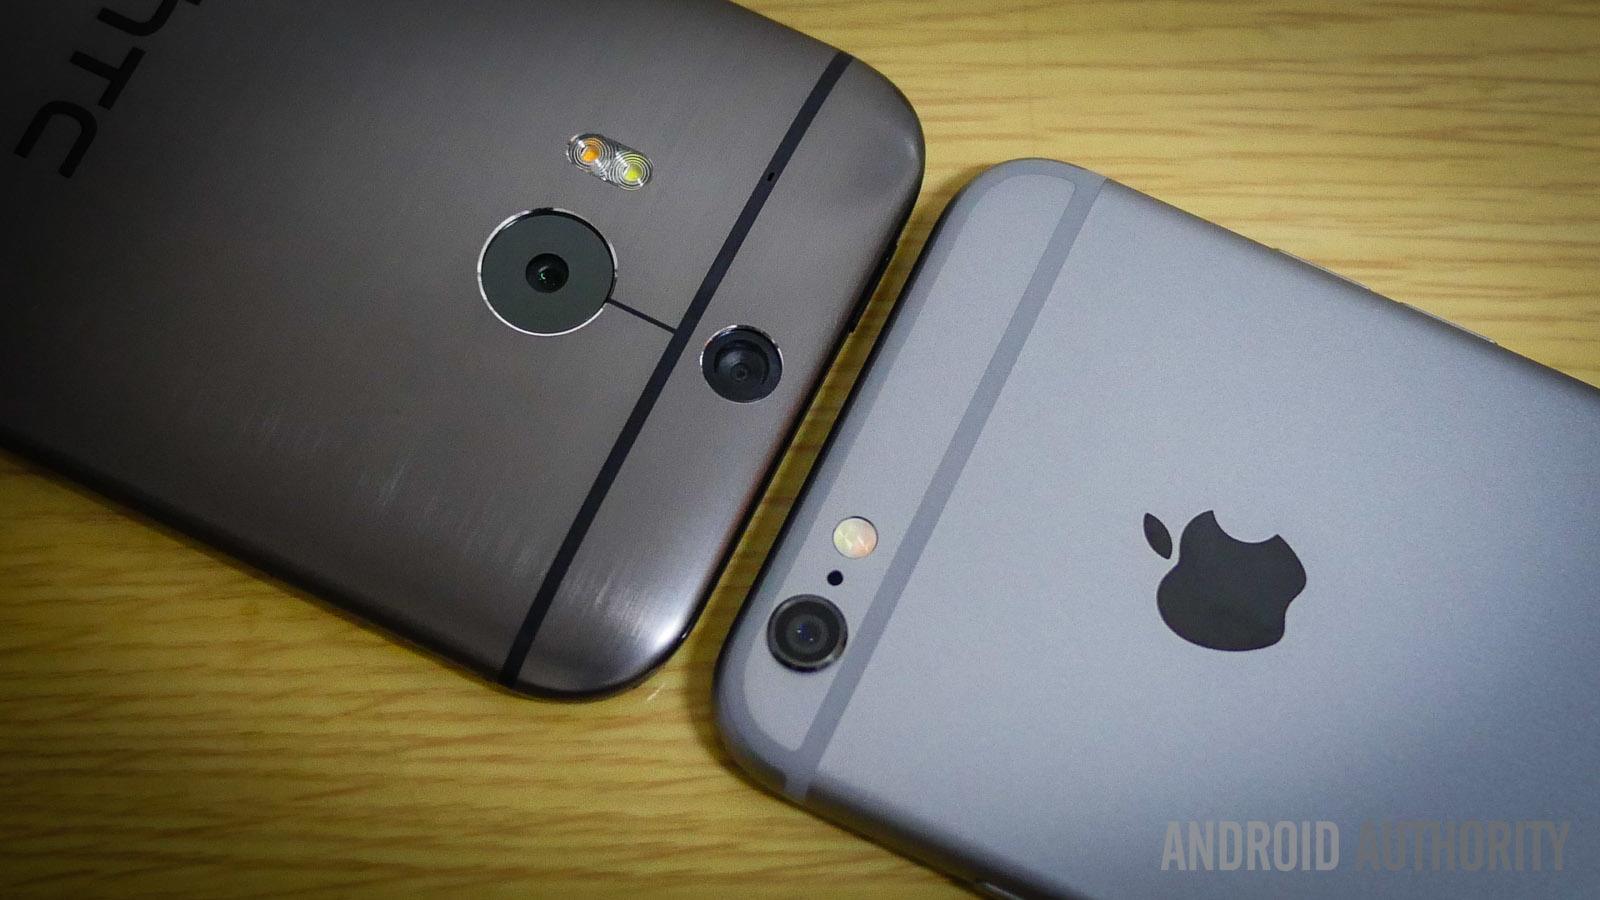 iphone 6 plus vs htc one m8 quick look aa (4 of 14)